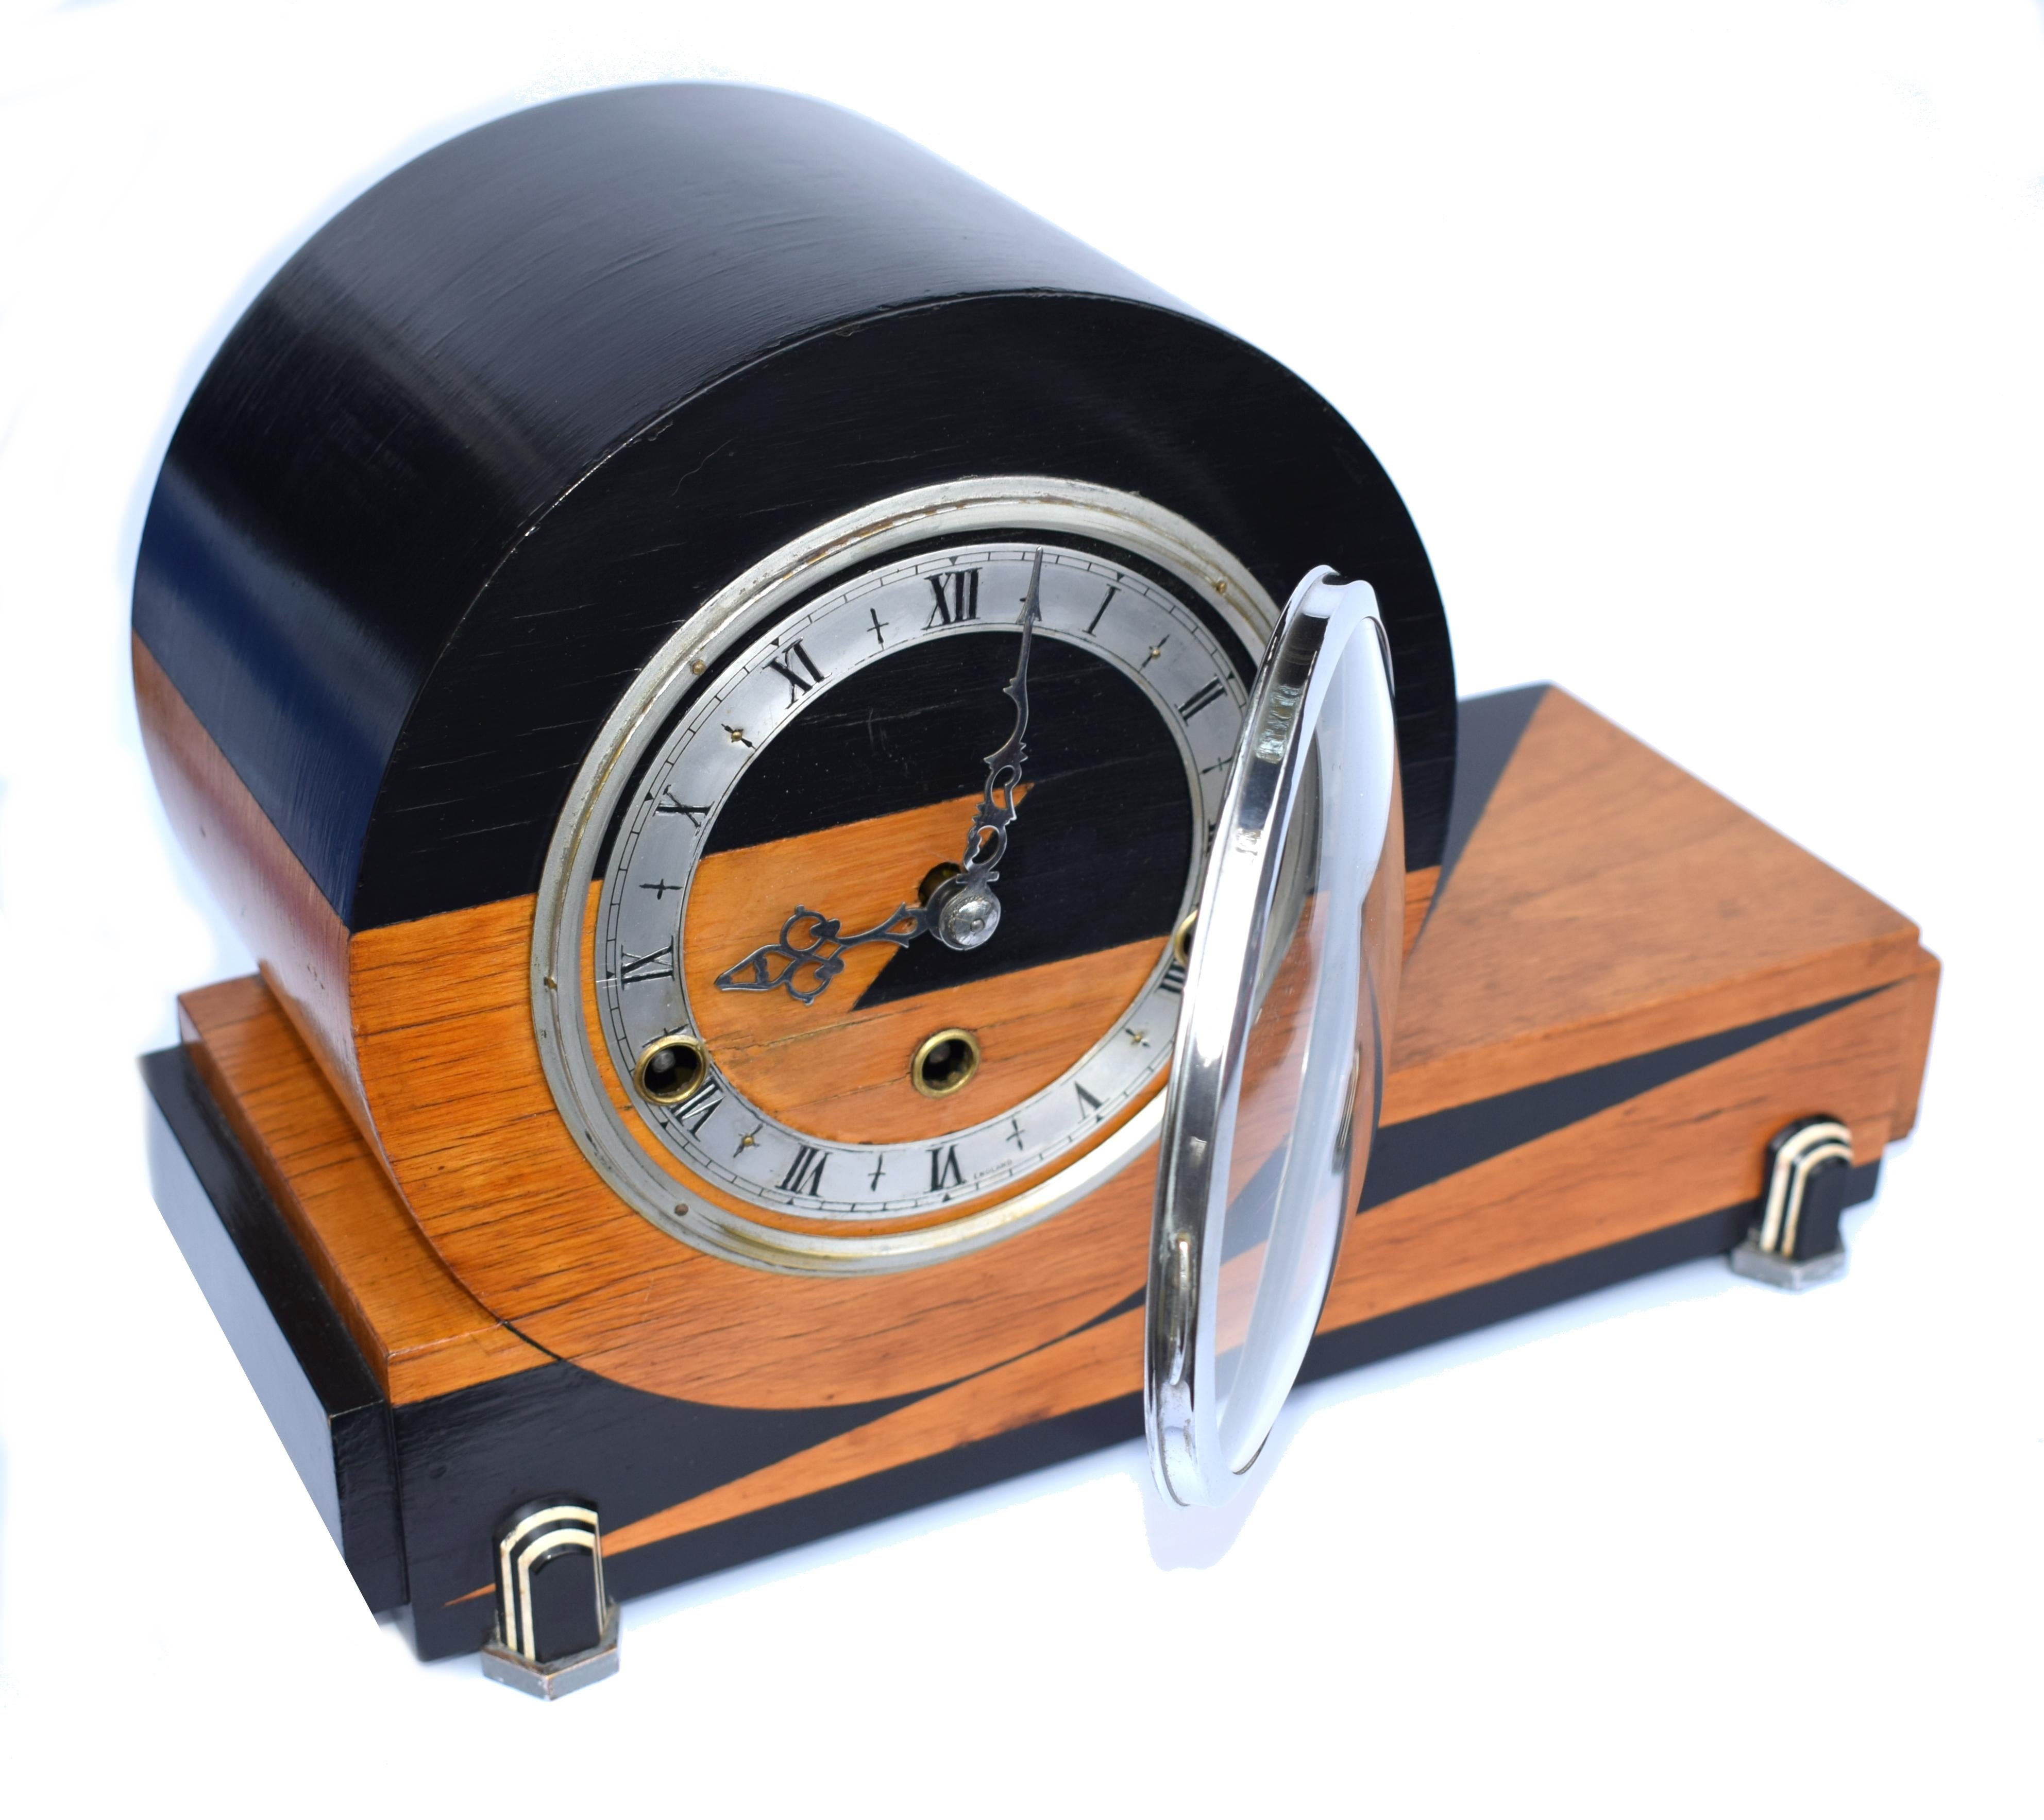 Art Deco Westminster Chime Mantle Clock by Norland, England 1